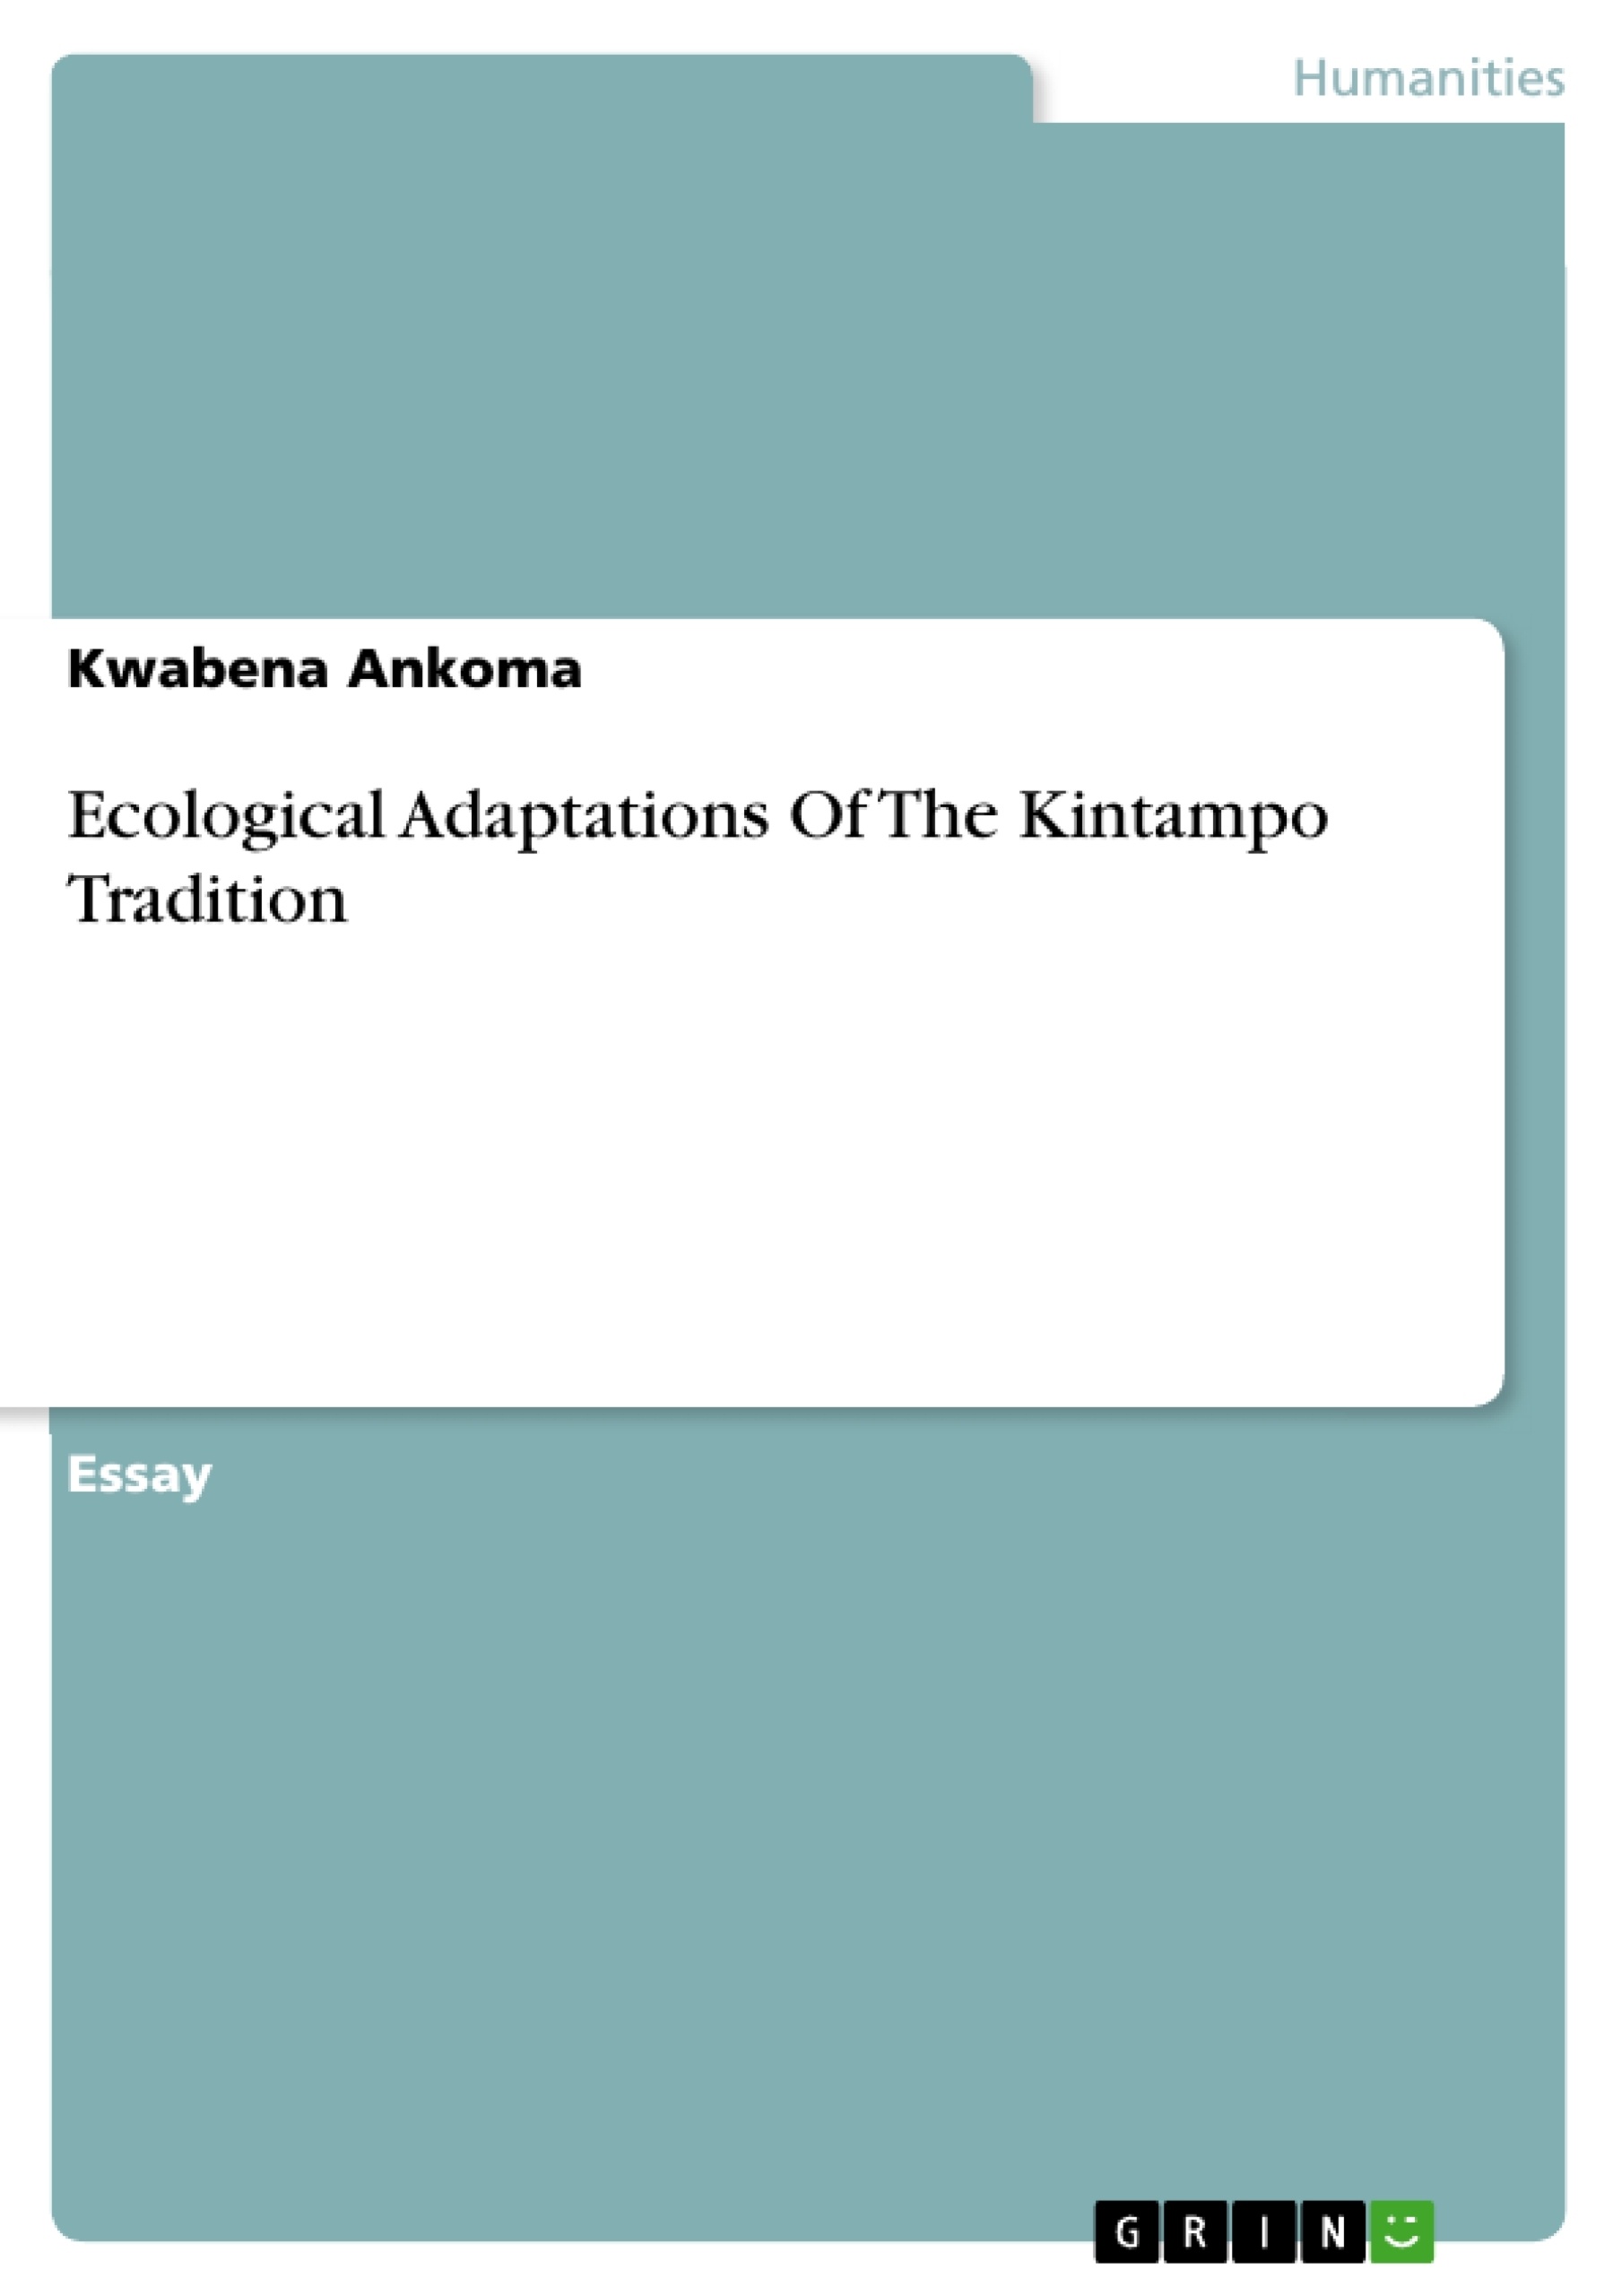 Título: Ecological Adaptations Of The Kintampo Tradition